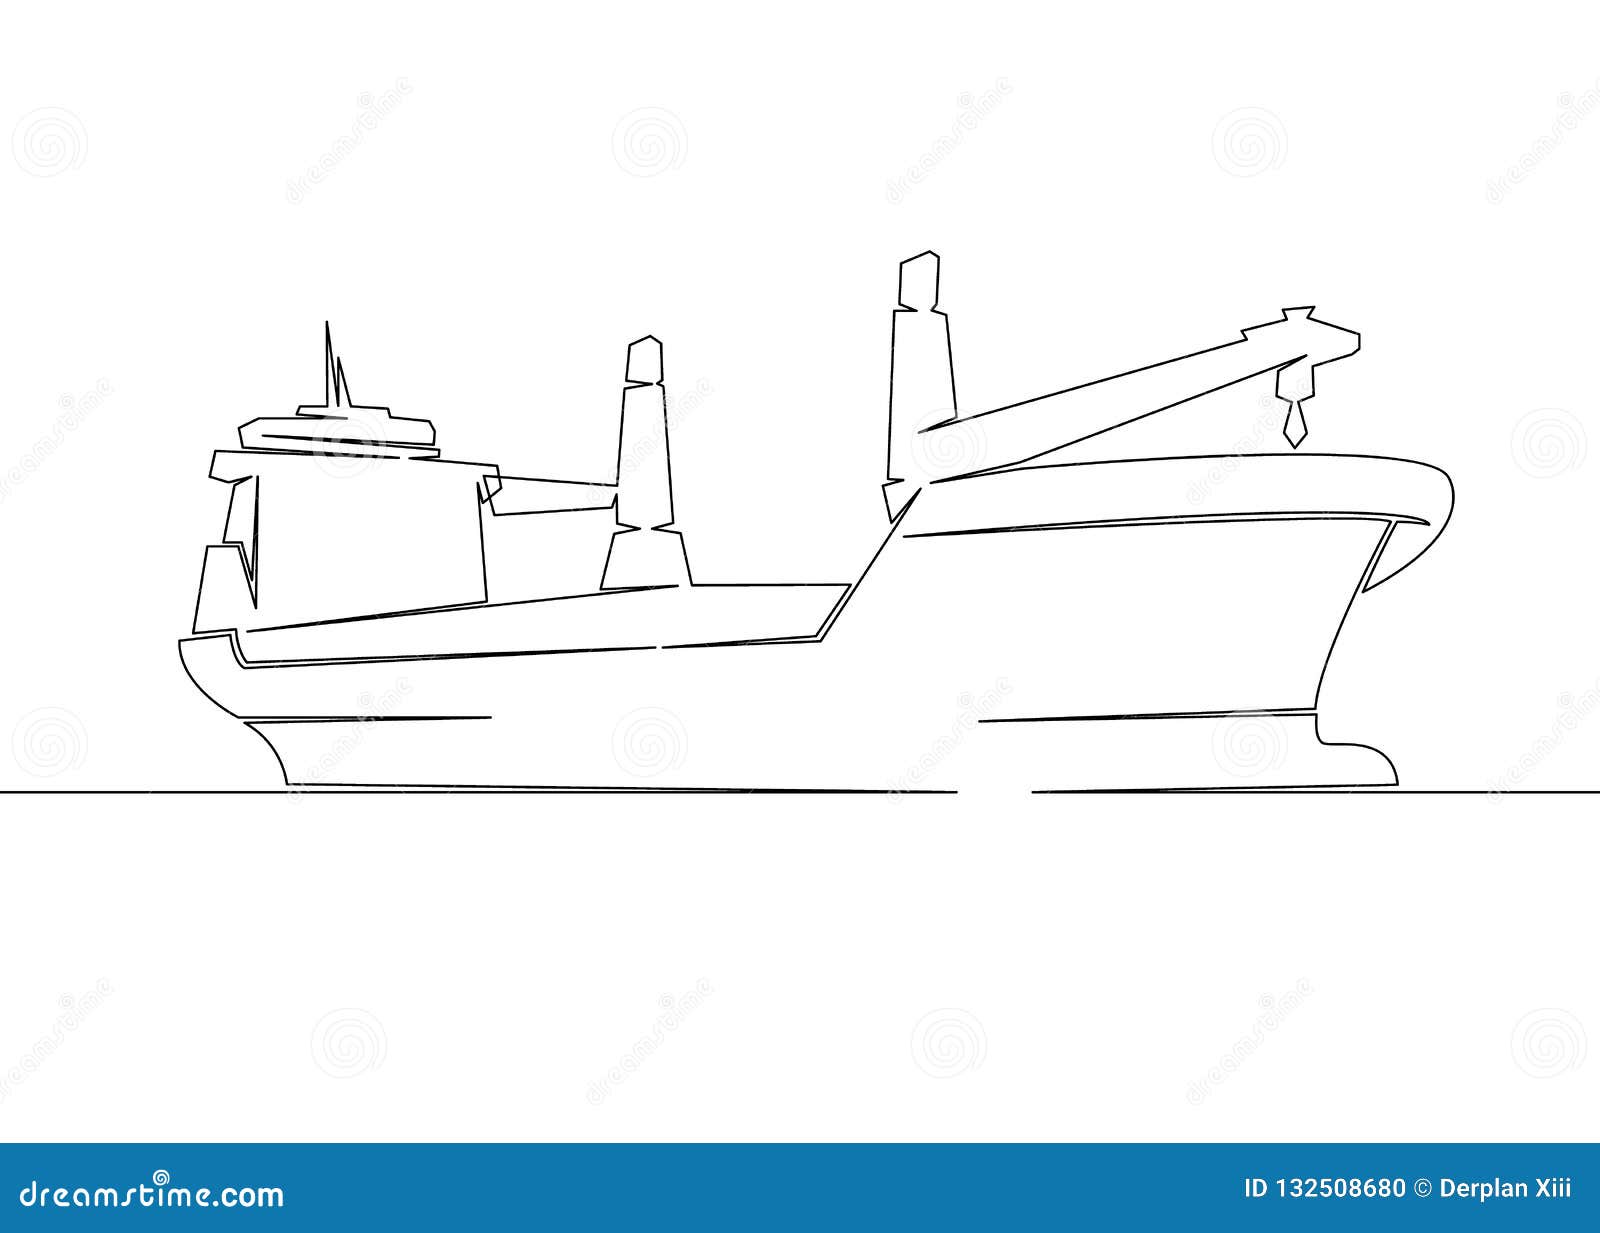 Animal Sketch Cargo Ship Drawing Easy with simple drawing